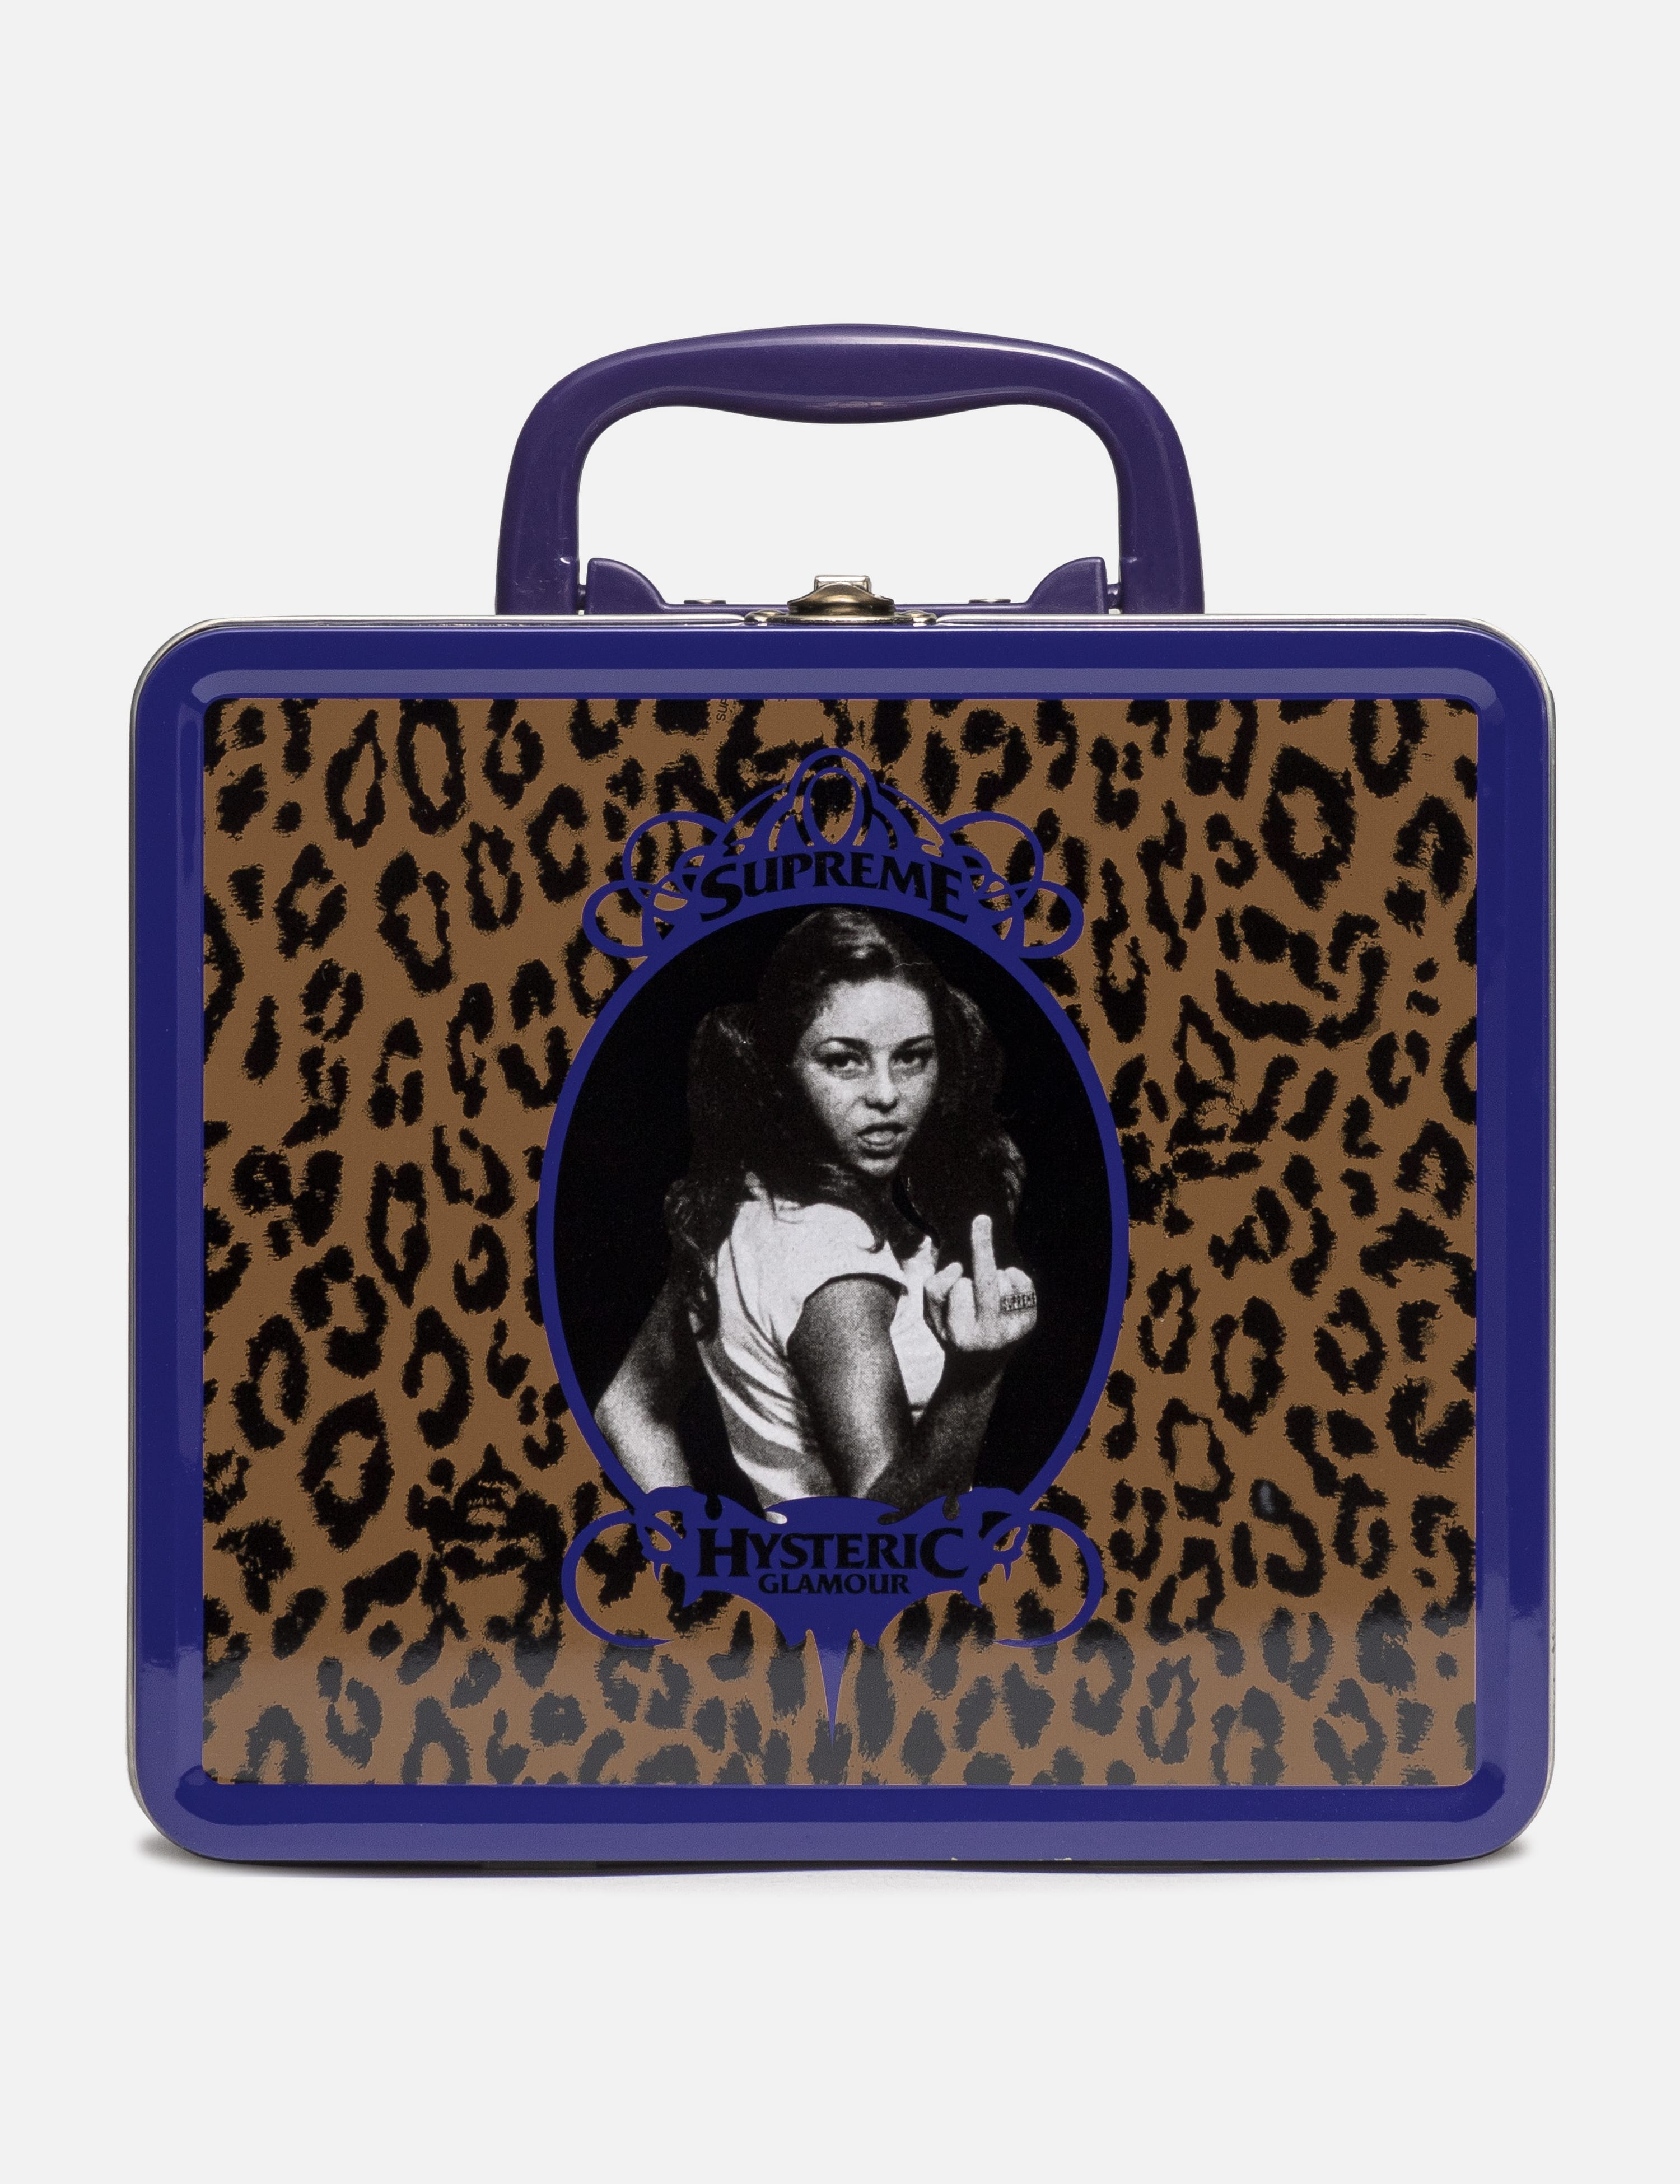 Supreme - Supreme Hysteric Glamour Lunchbox | HBX - Globally